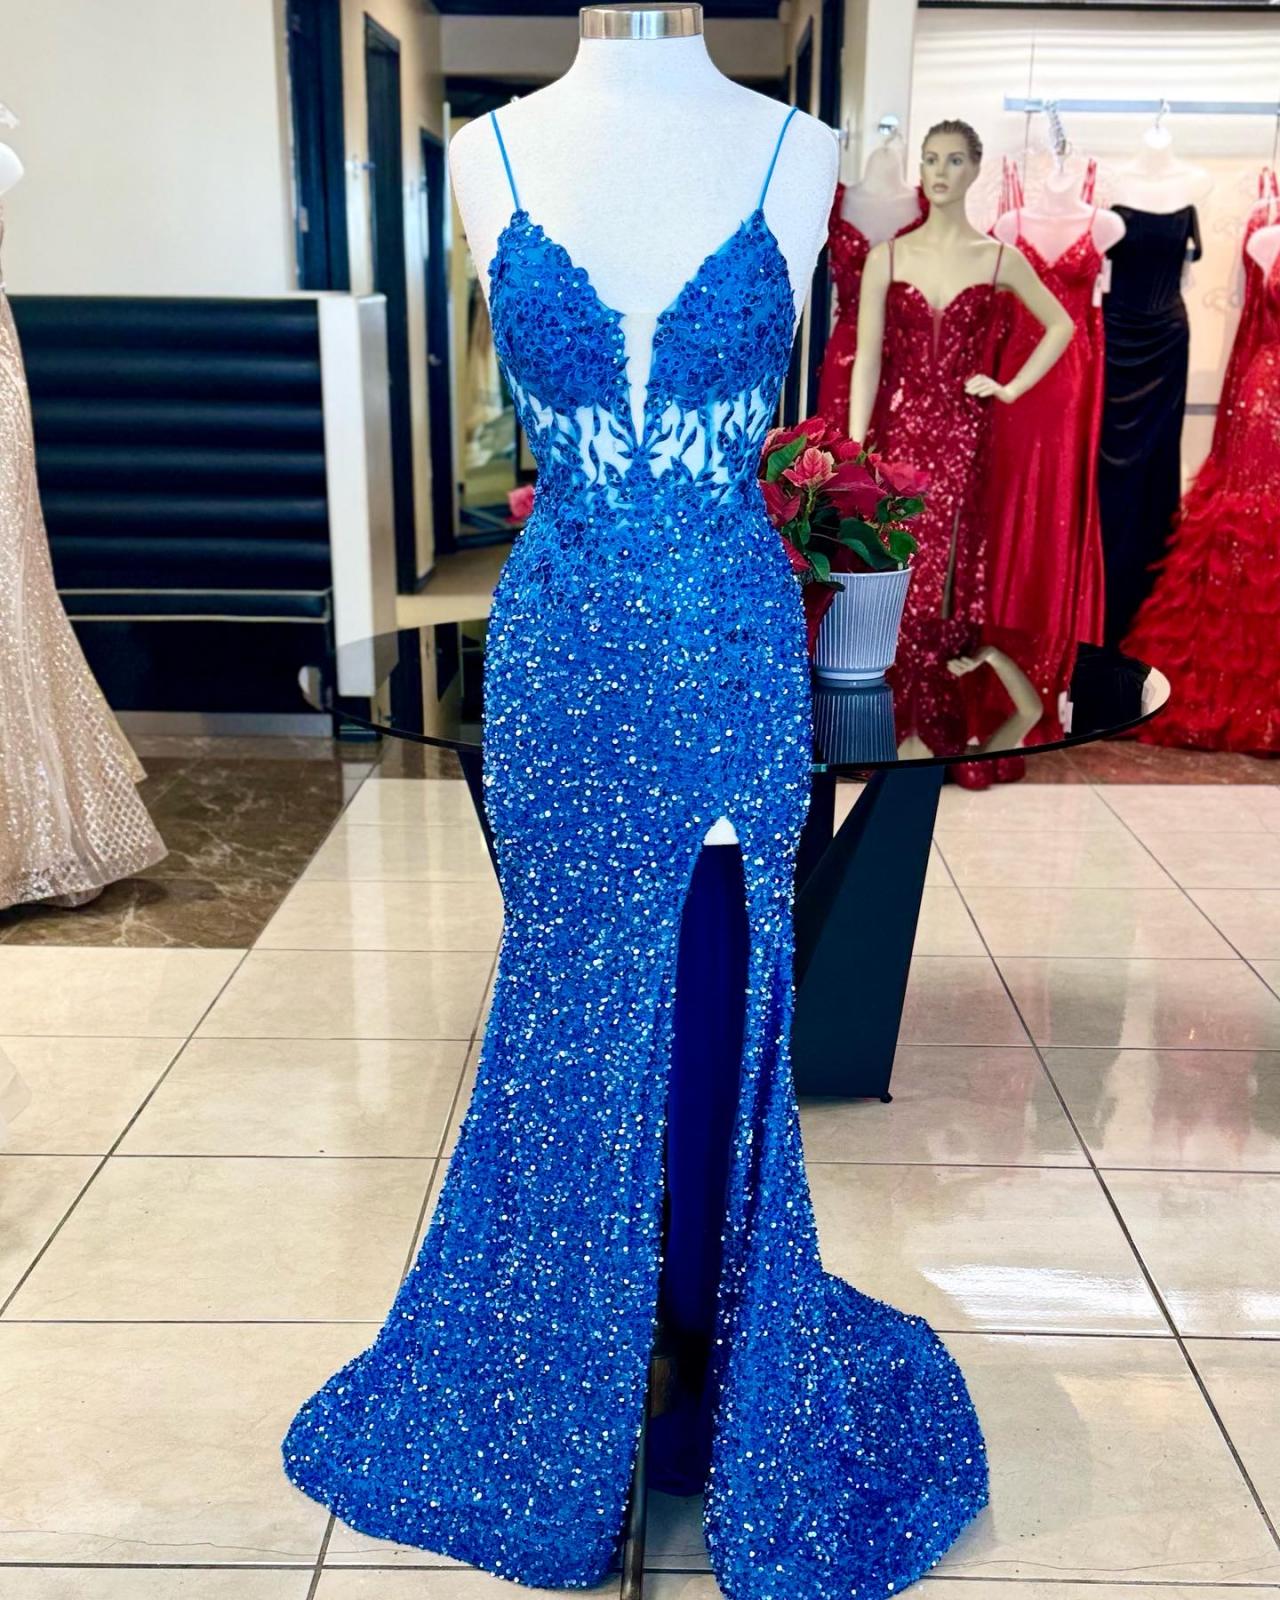 Royal Blue Spaghetti Straps Prom Dresses Illusion Lace Appliques Corset Evening Dresses Women's Mermaid Formal Evening Dress With